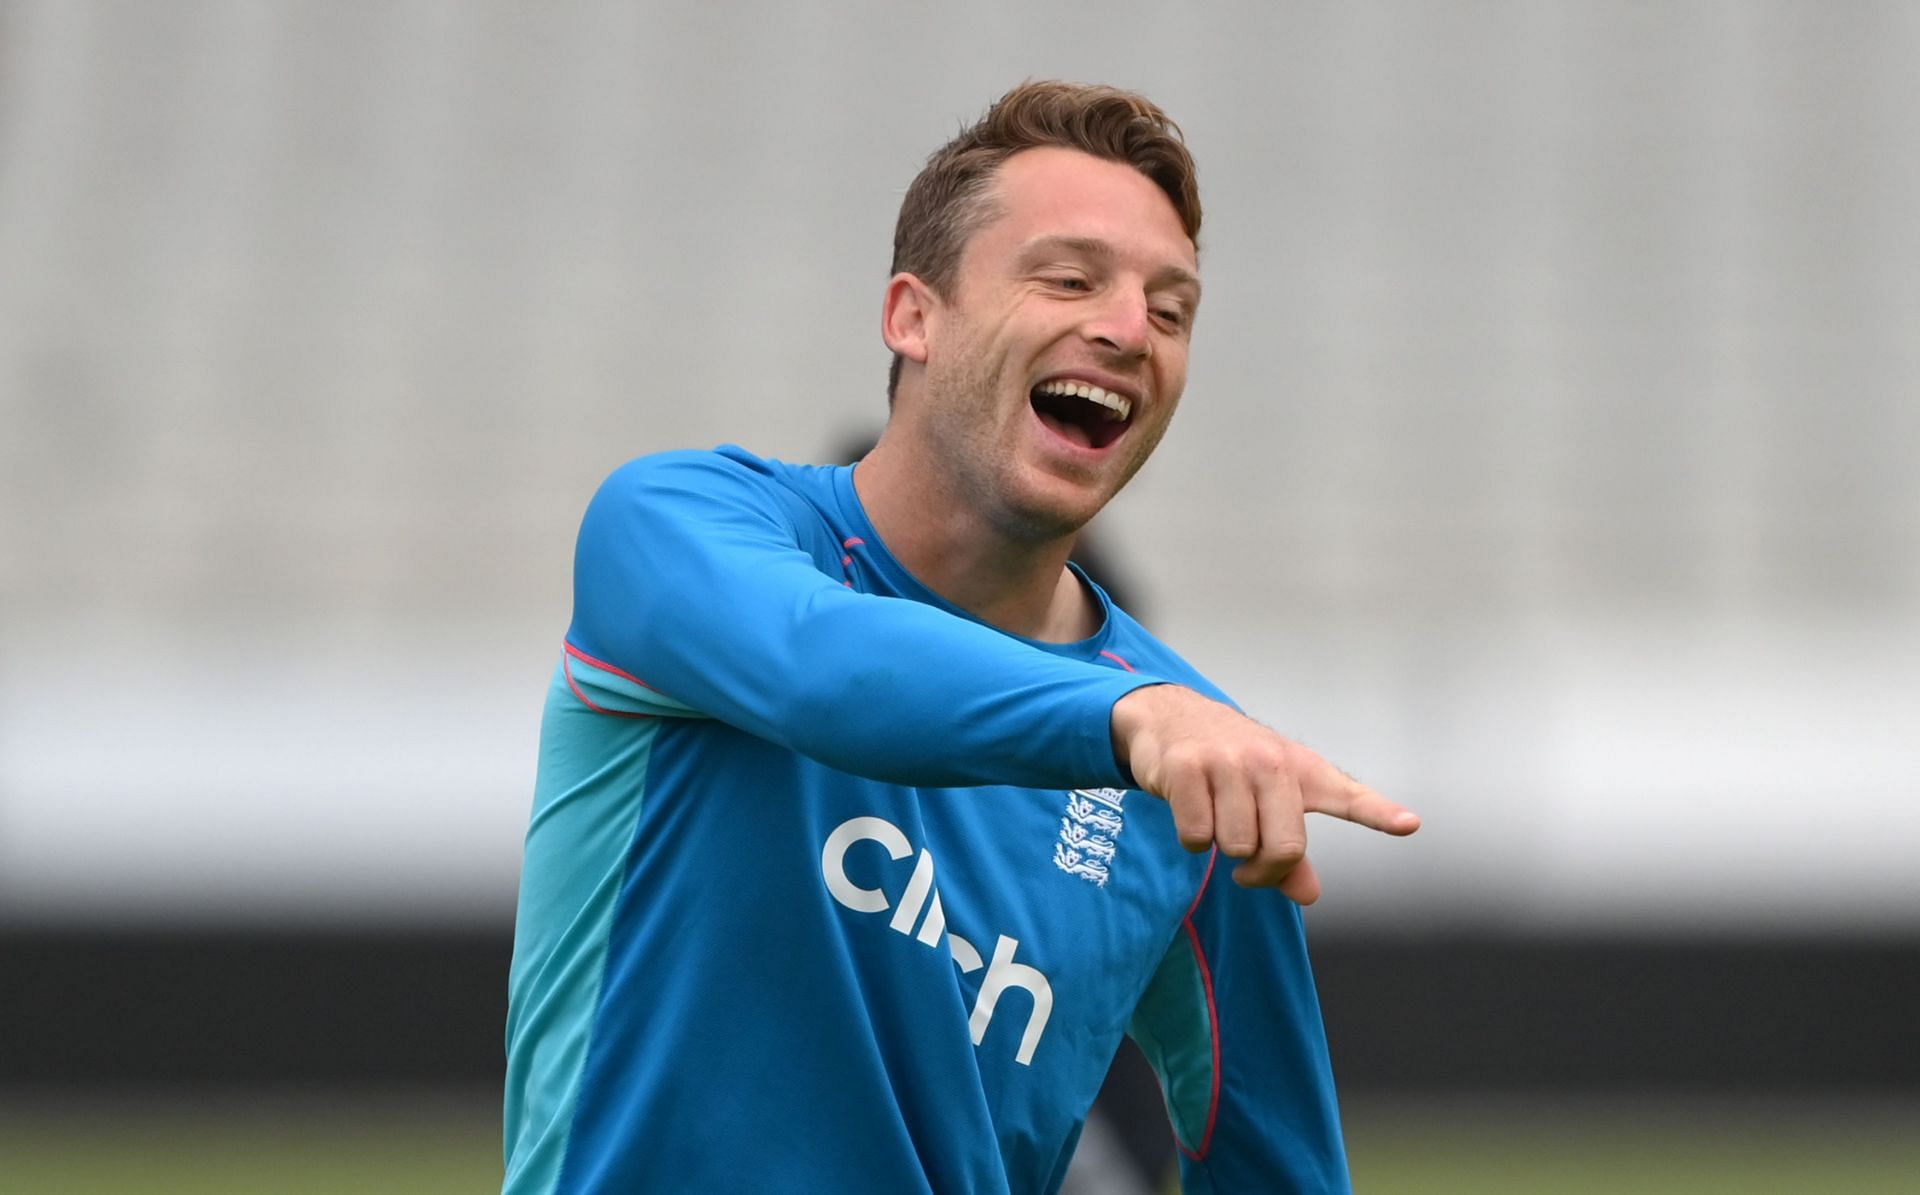 Jos Buttler is all set to open the batting for England